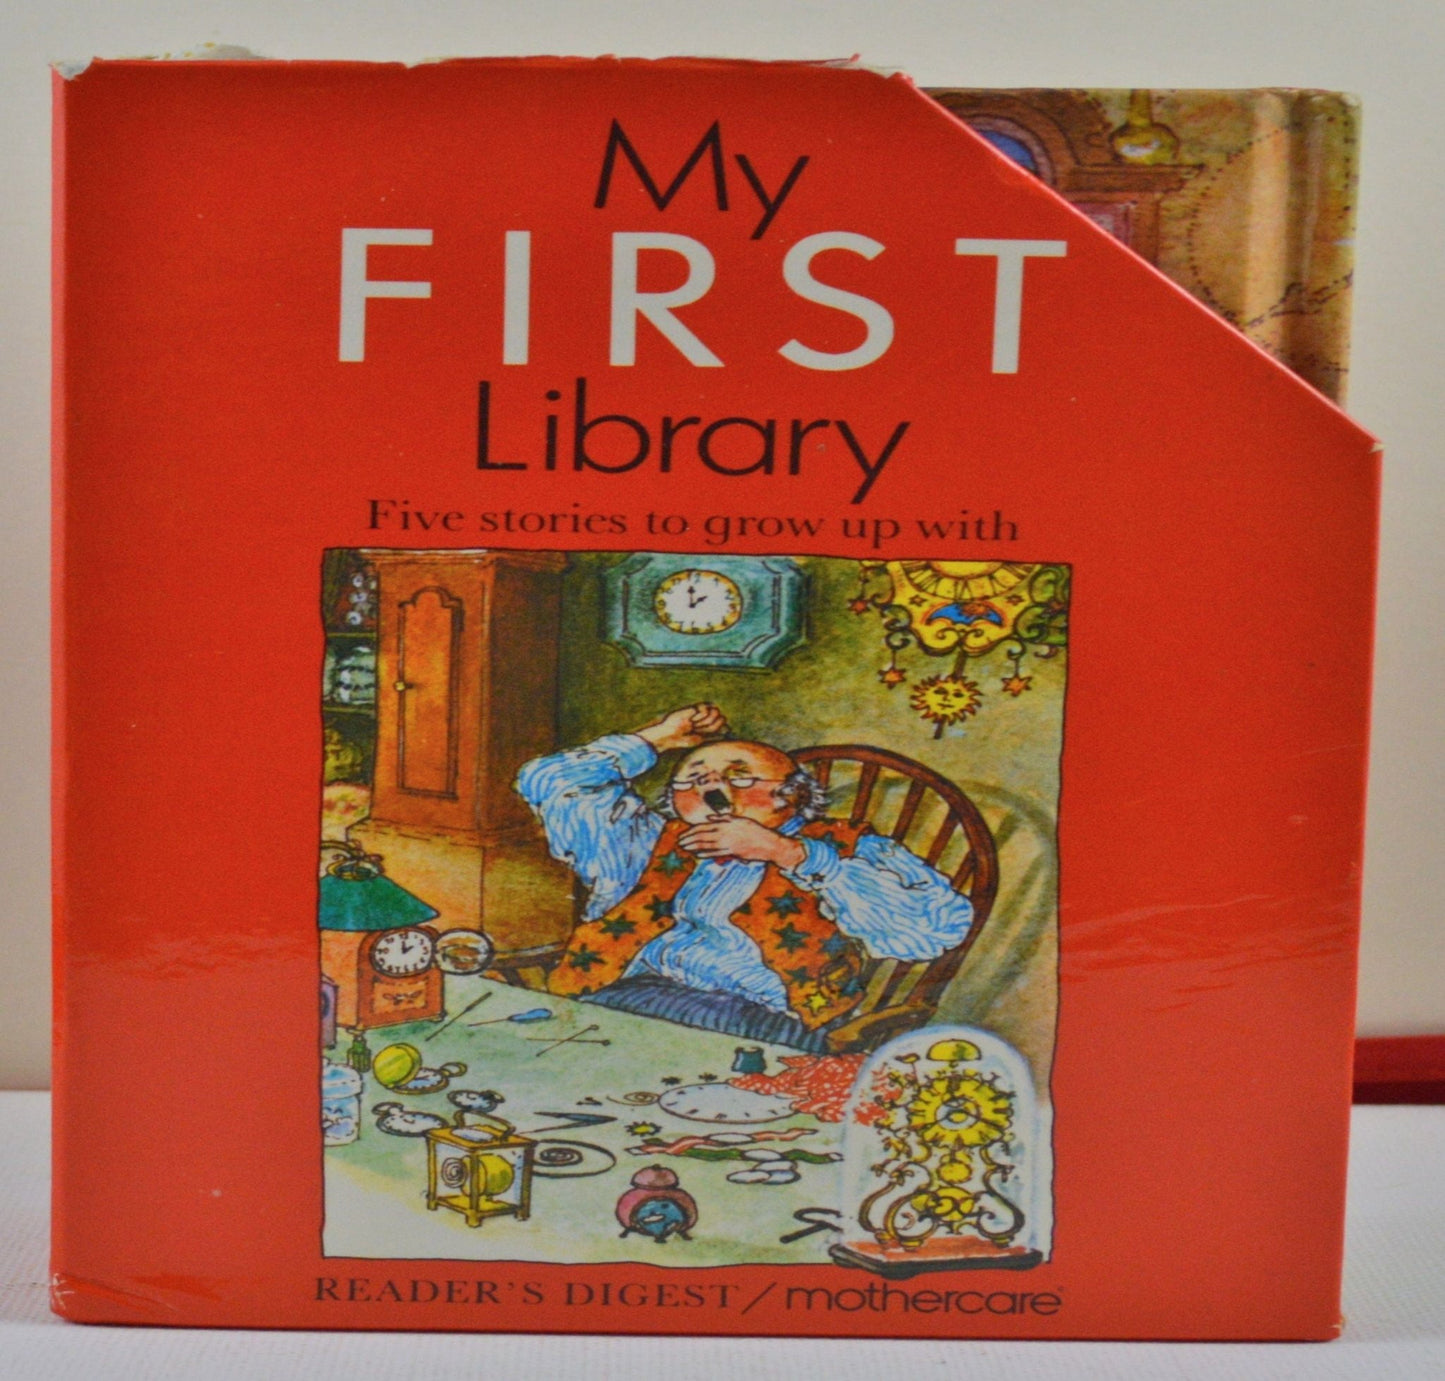 SECONDHAND BOOK READERS DIGEST/MOTHERCARE MY FIRST LIBRARY GOOD CONDITION - TMD167207